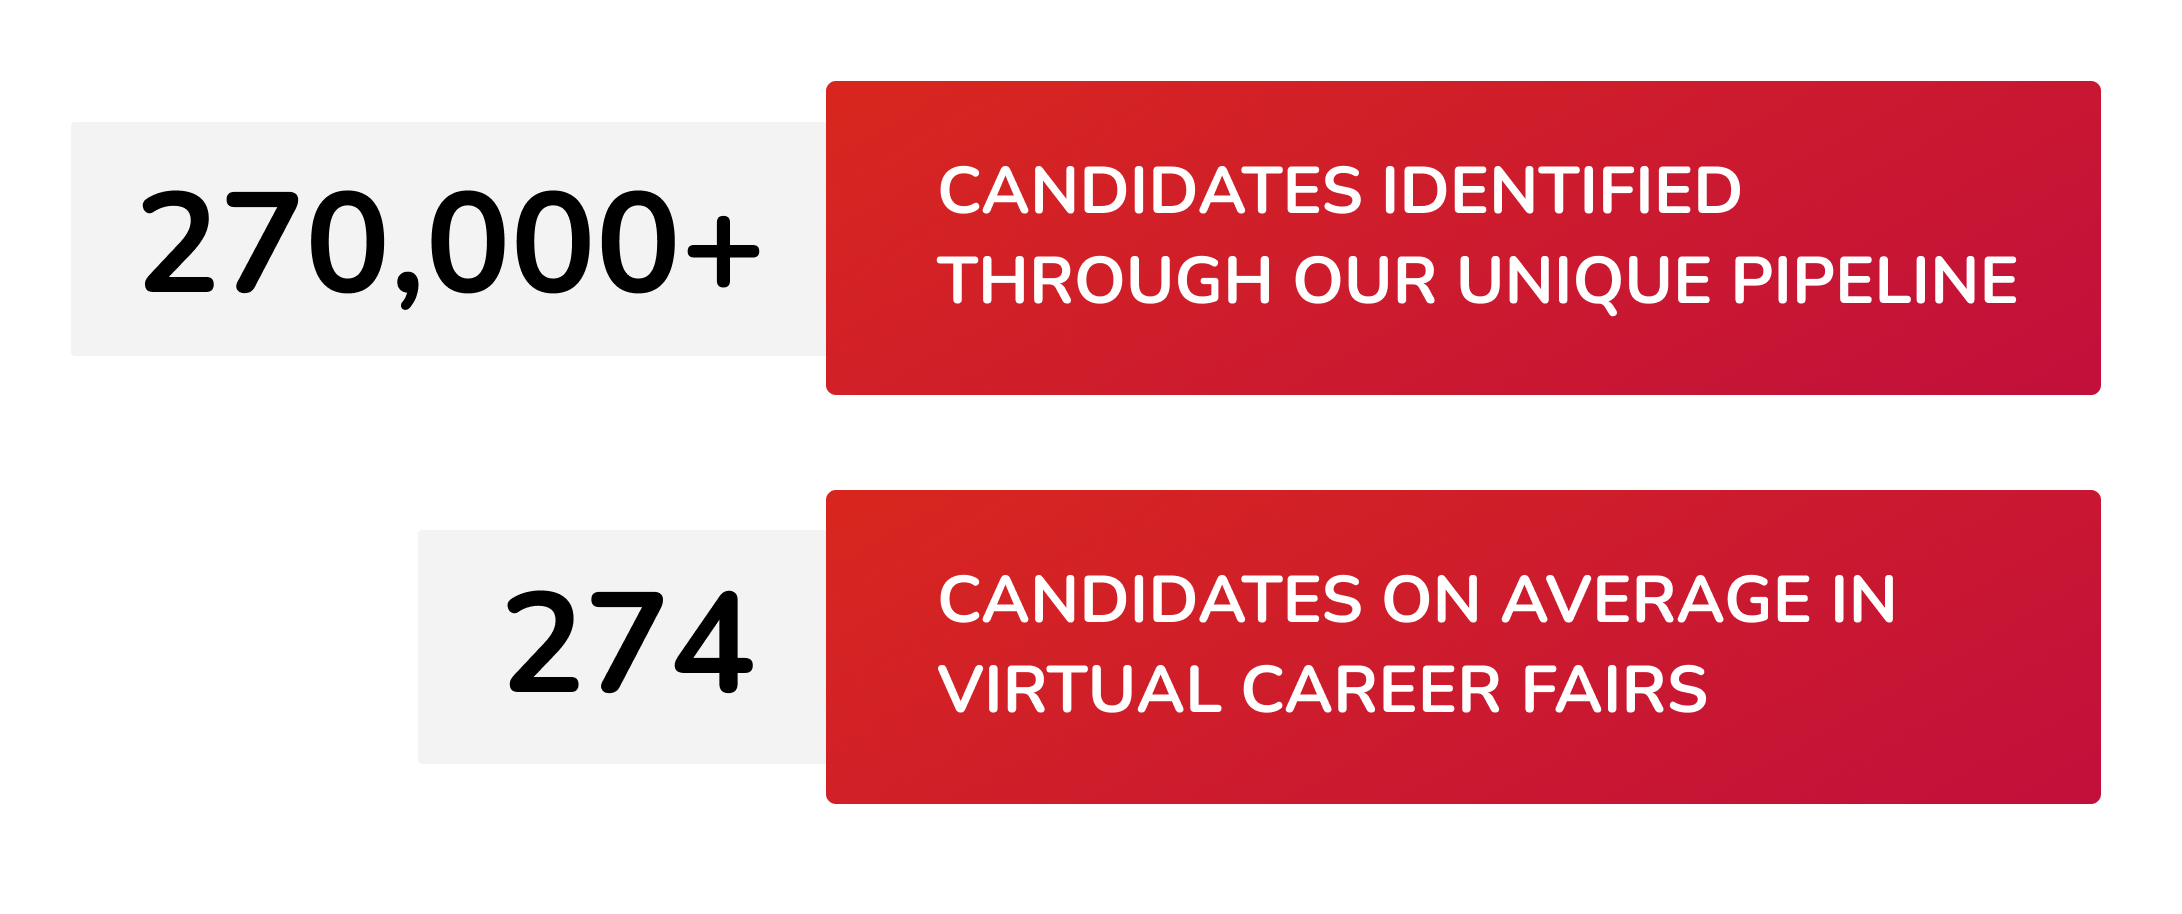 More than 270,000 candidates identified through our unique pipeline, 274 candidates on average in virtual career fairs